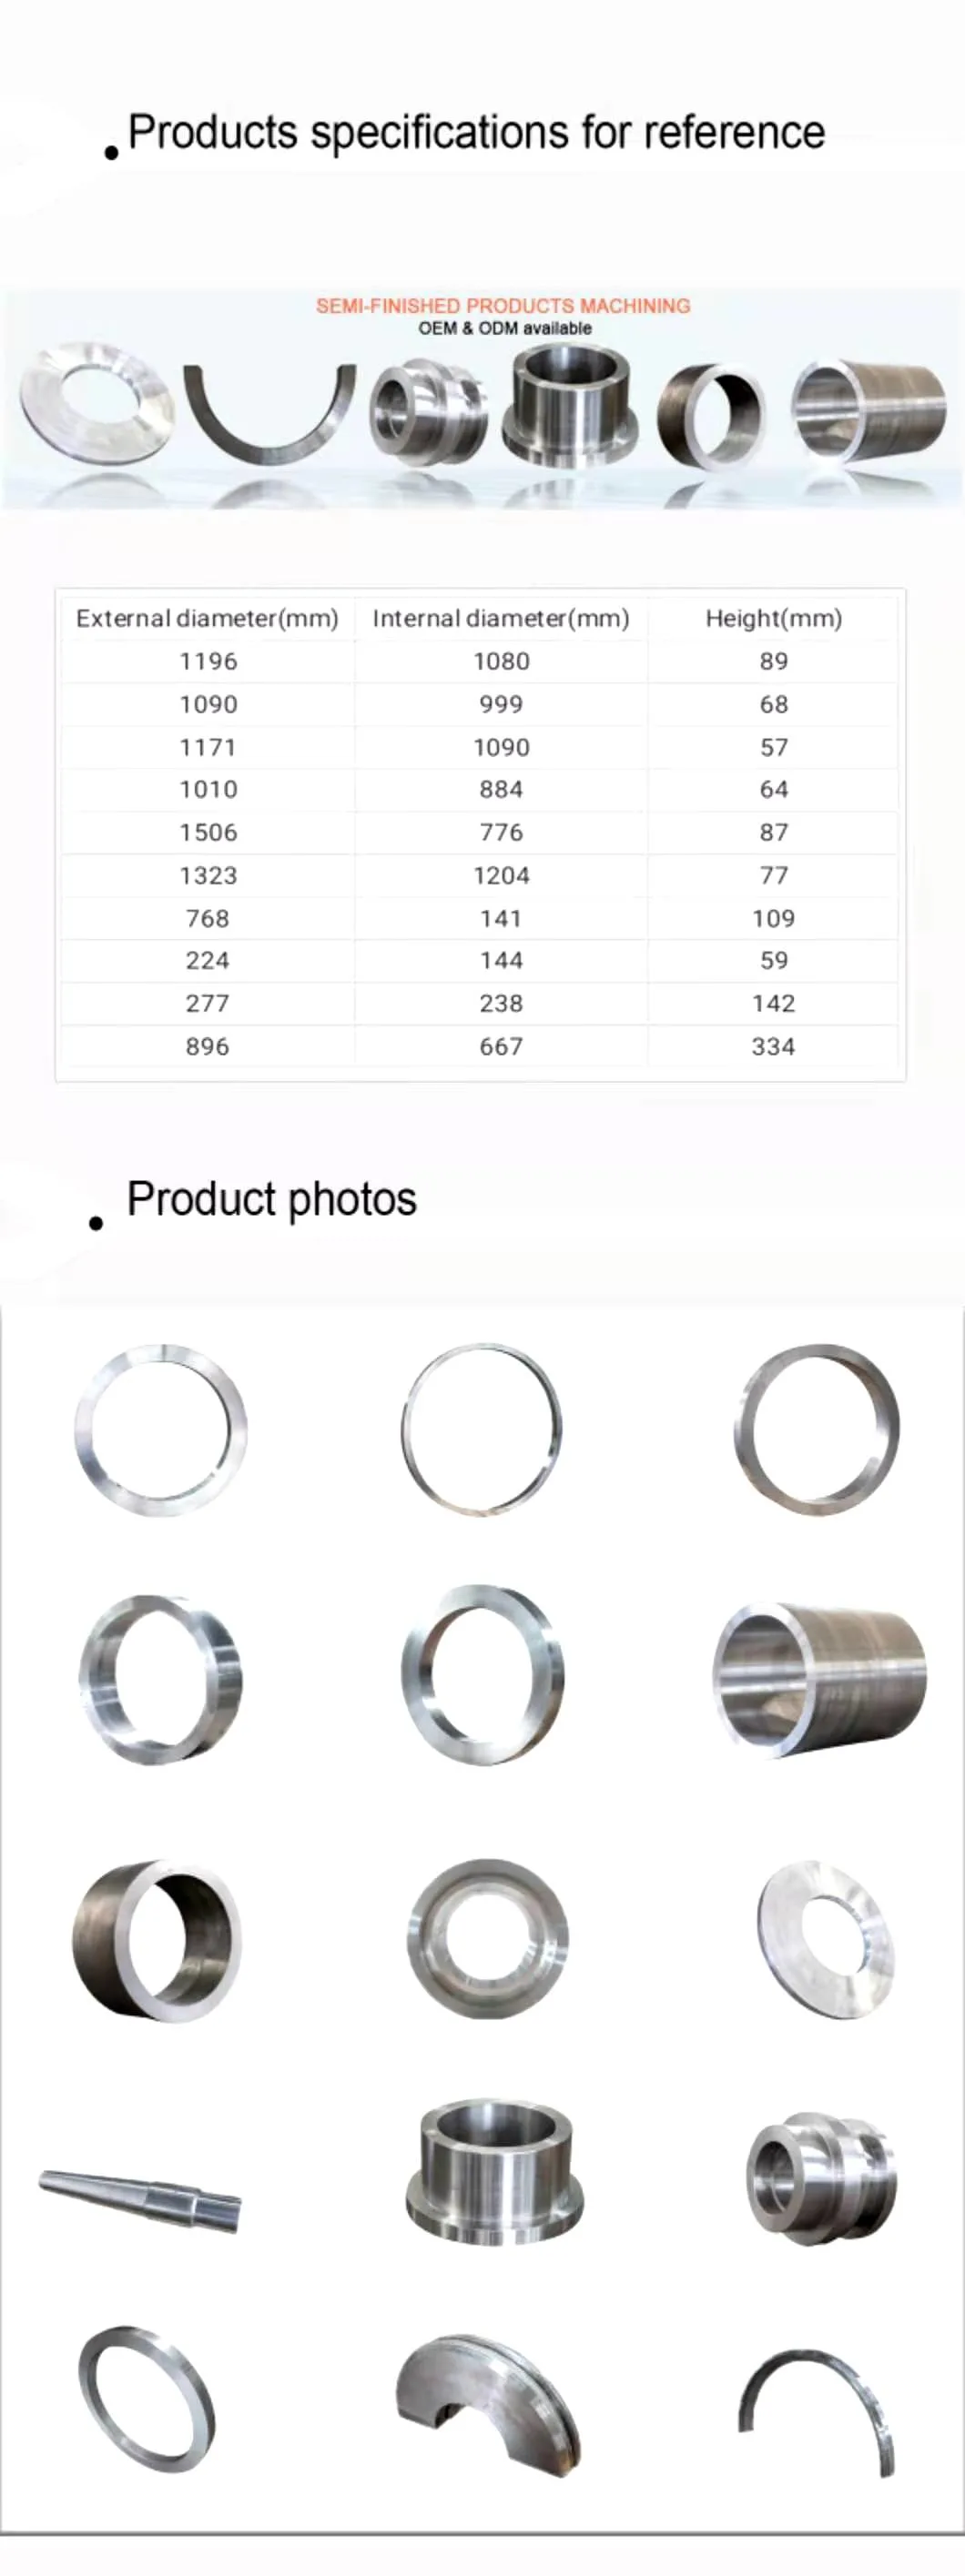 Stainless Steel Ring, Flange, Ring Forging Blank, Mechanical Parts and Complete Sets of Equipment